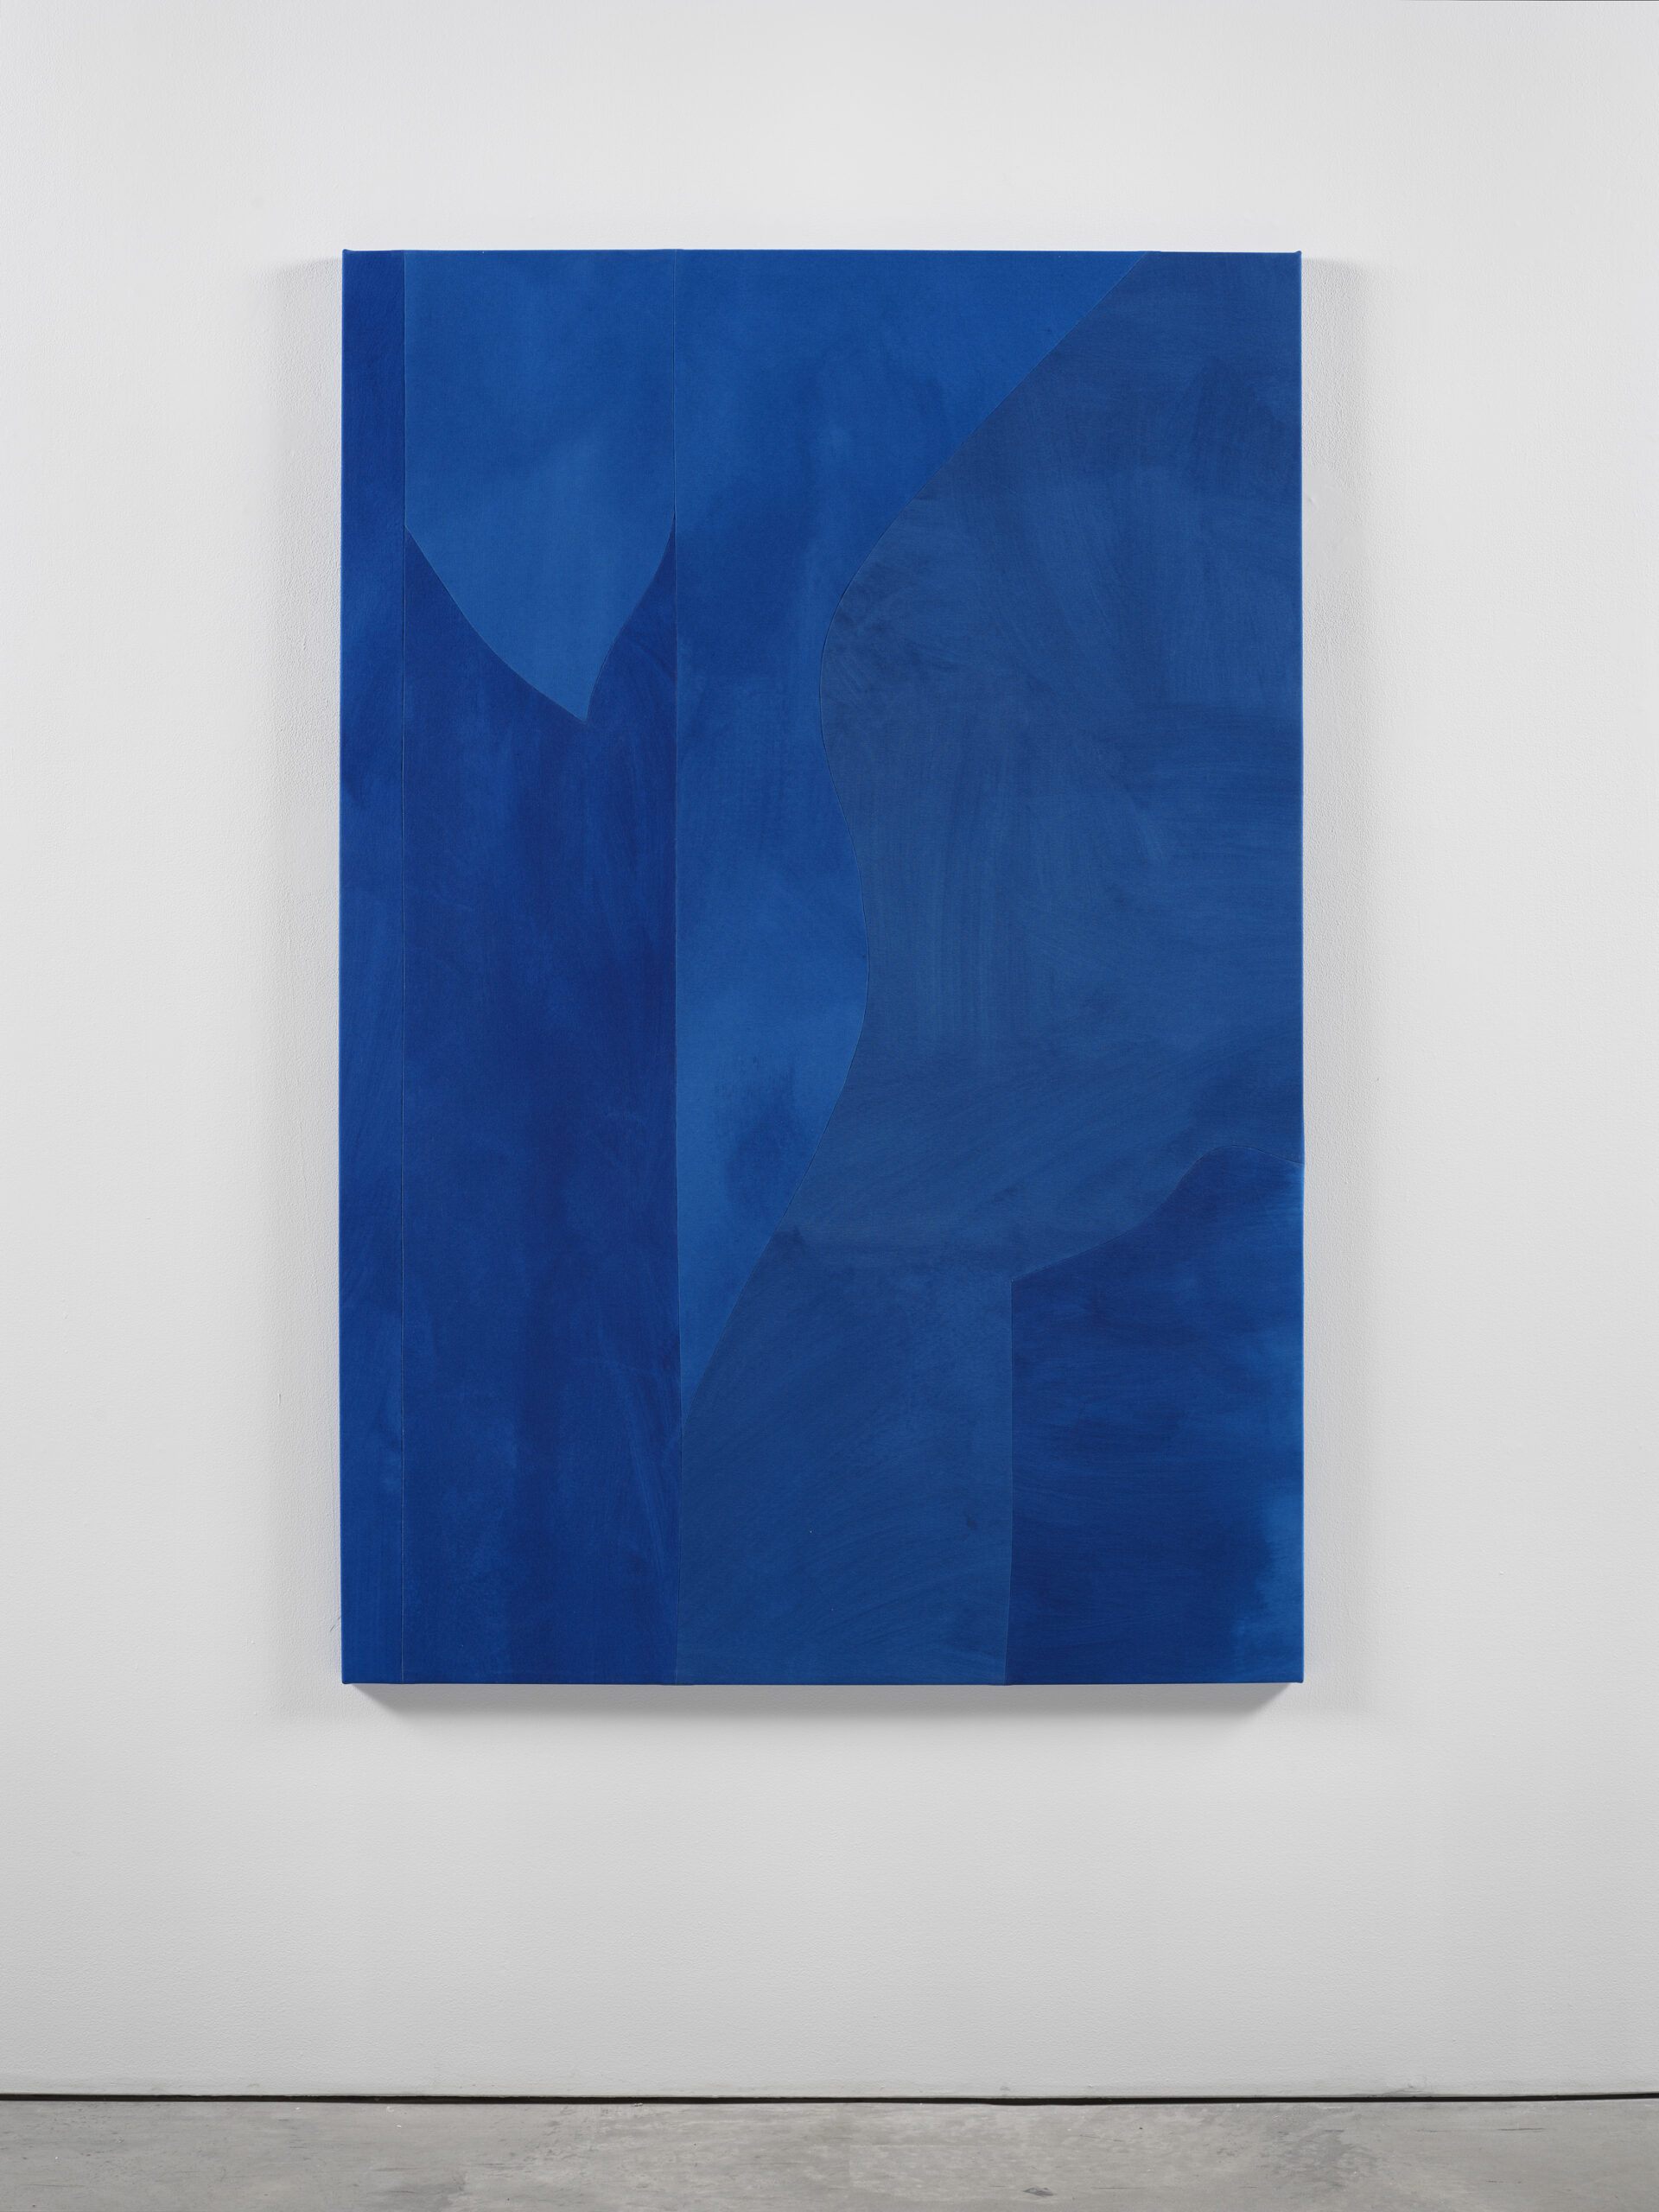 Sara Crowner's blue abstract painting.